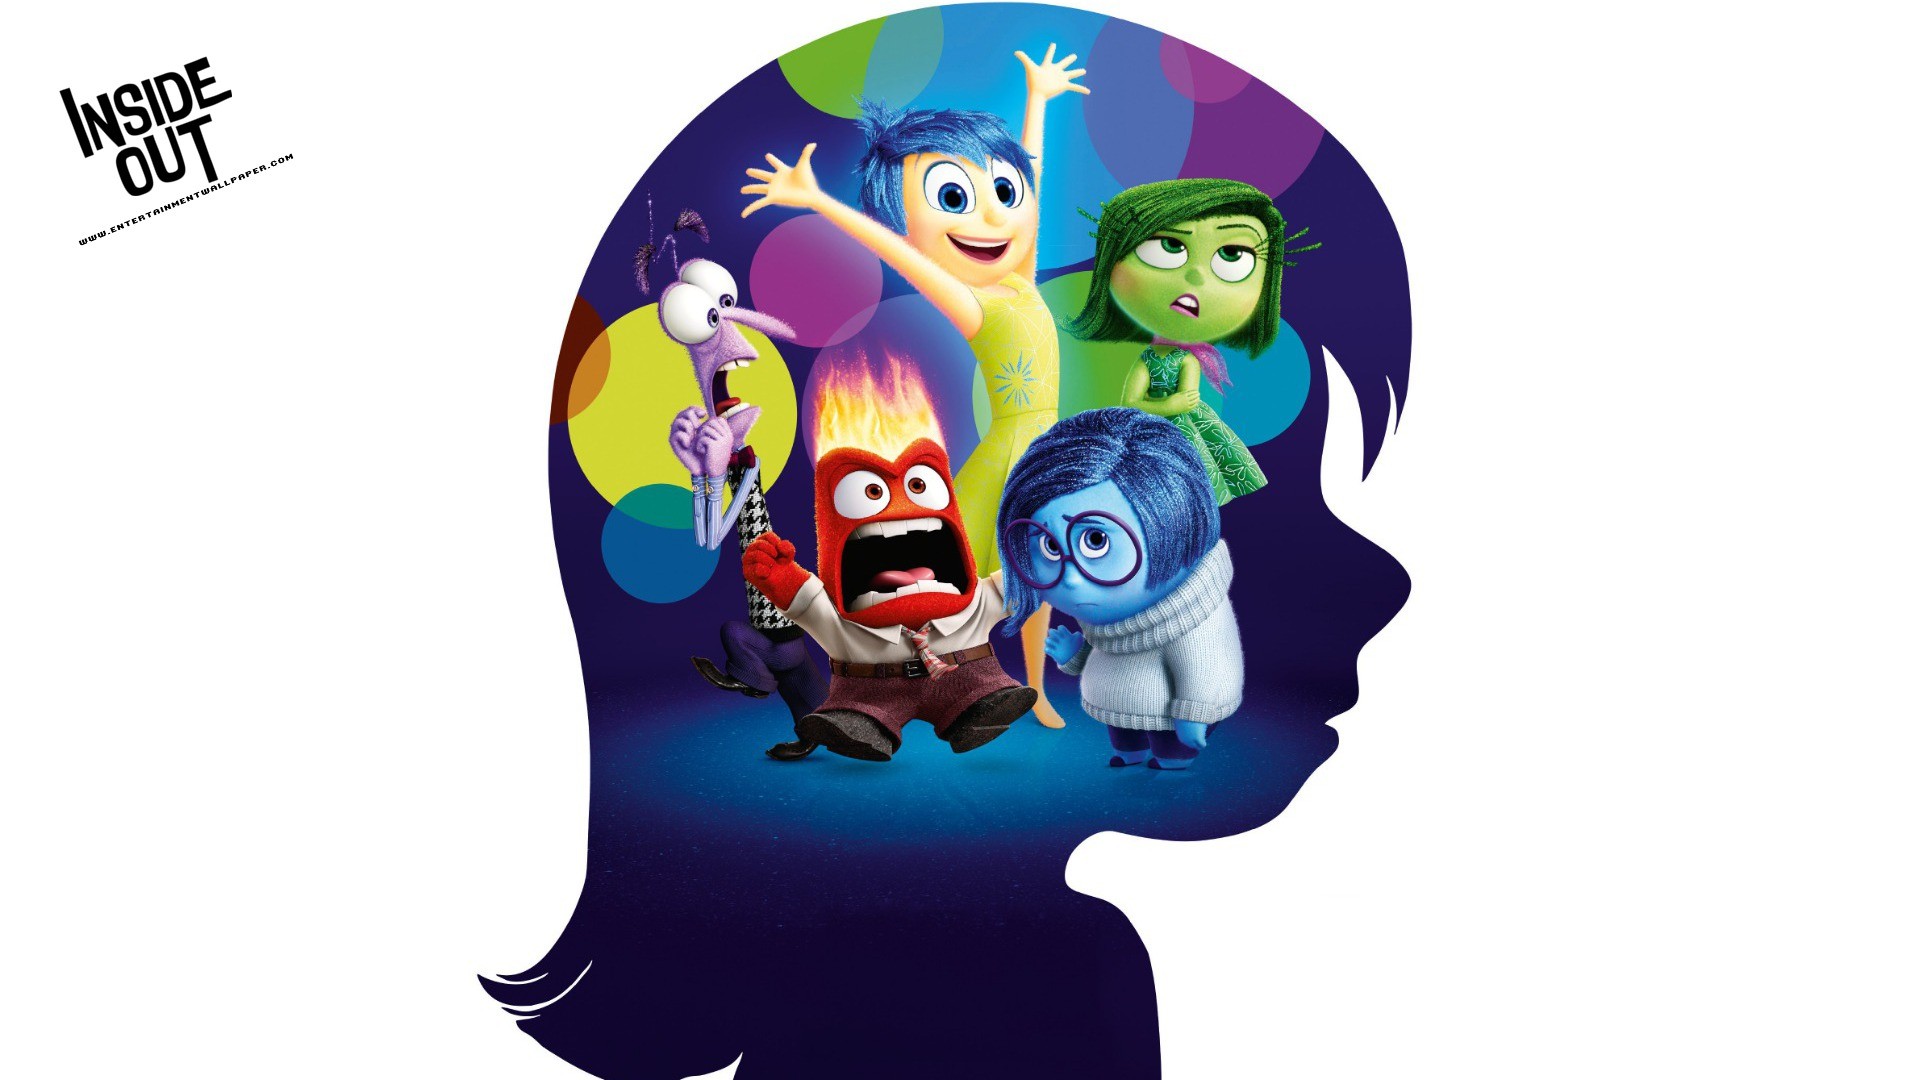 General 1920x1080 Inside Out animated movies movies Pixar Animation Studios